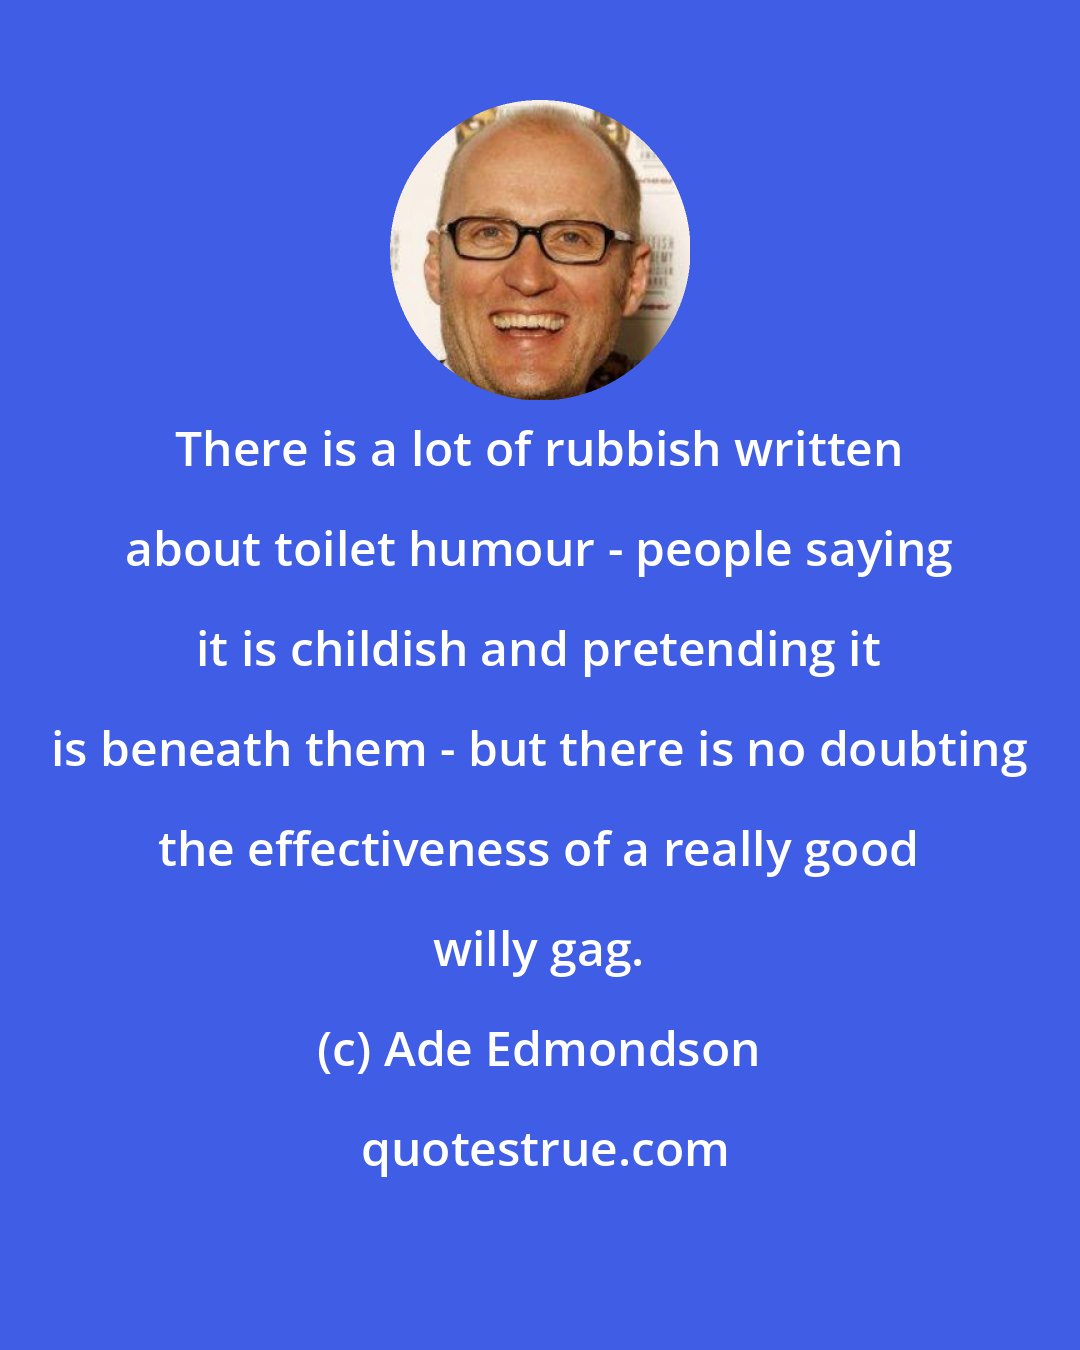 Ade Edmondson: There is a lot of rubbish written about toilet humour - people saying it is childish and pretending it is beneath them - but there is no doubting the effectiveness of a really good willy gag.